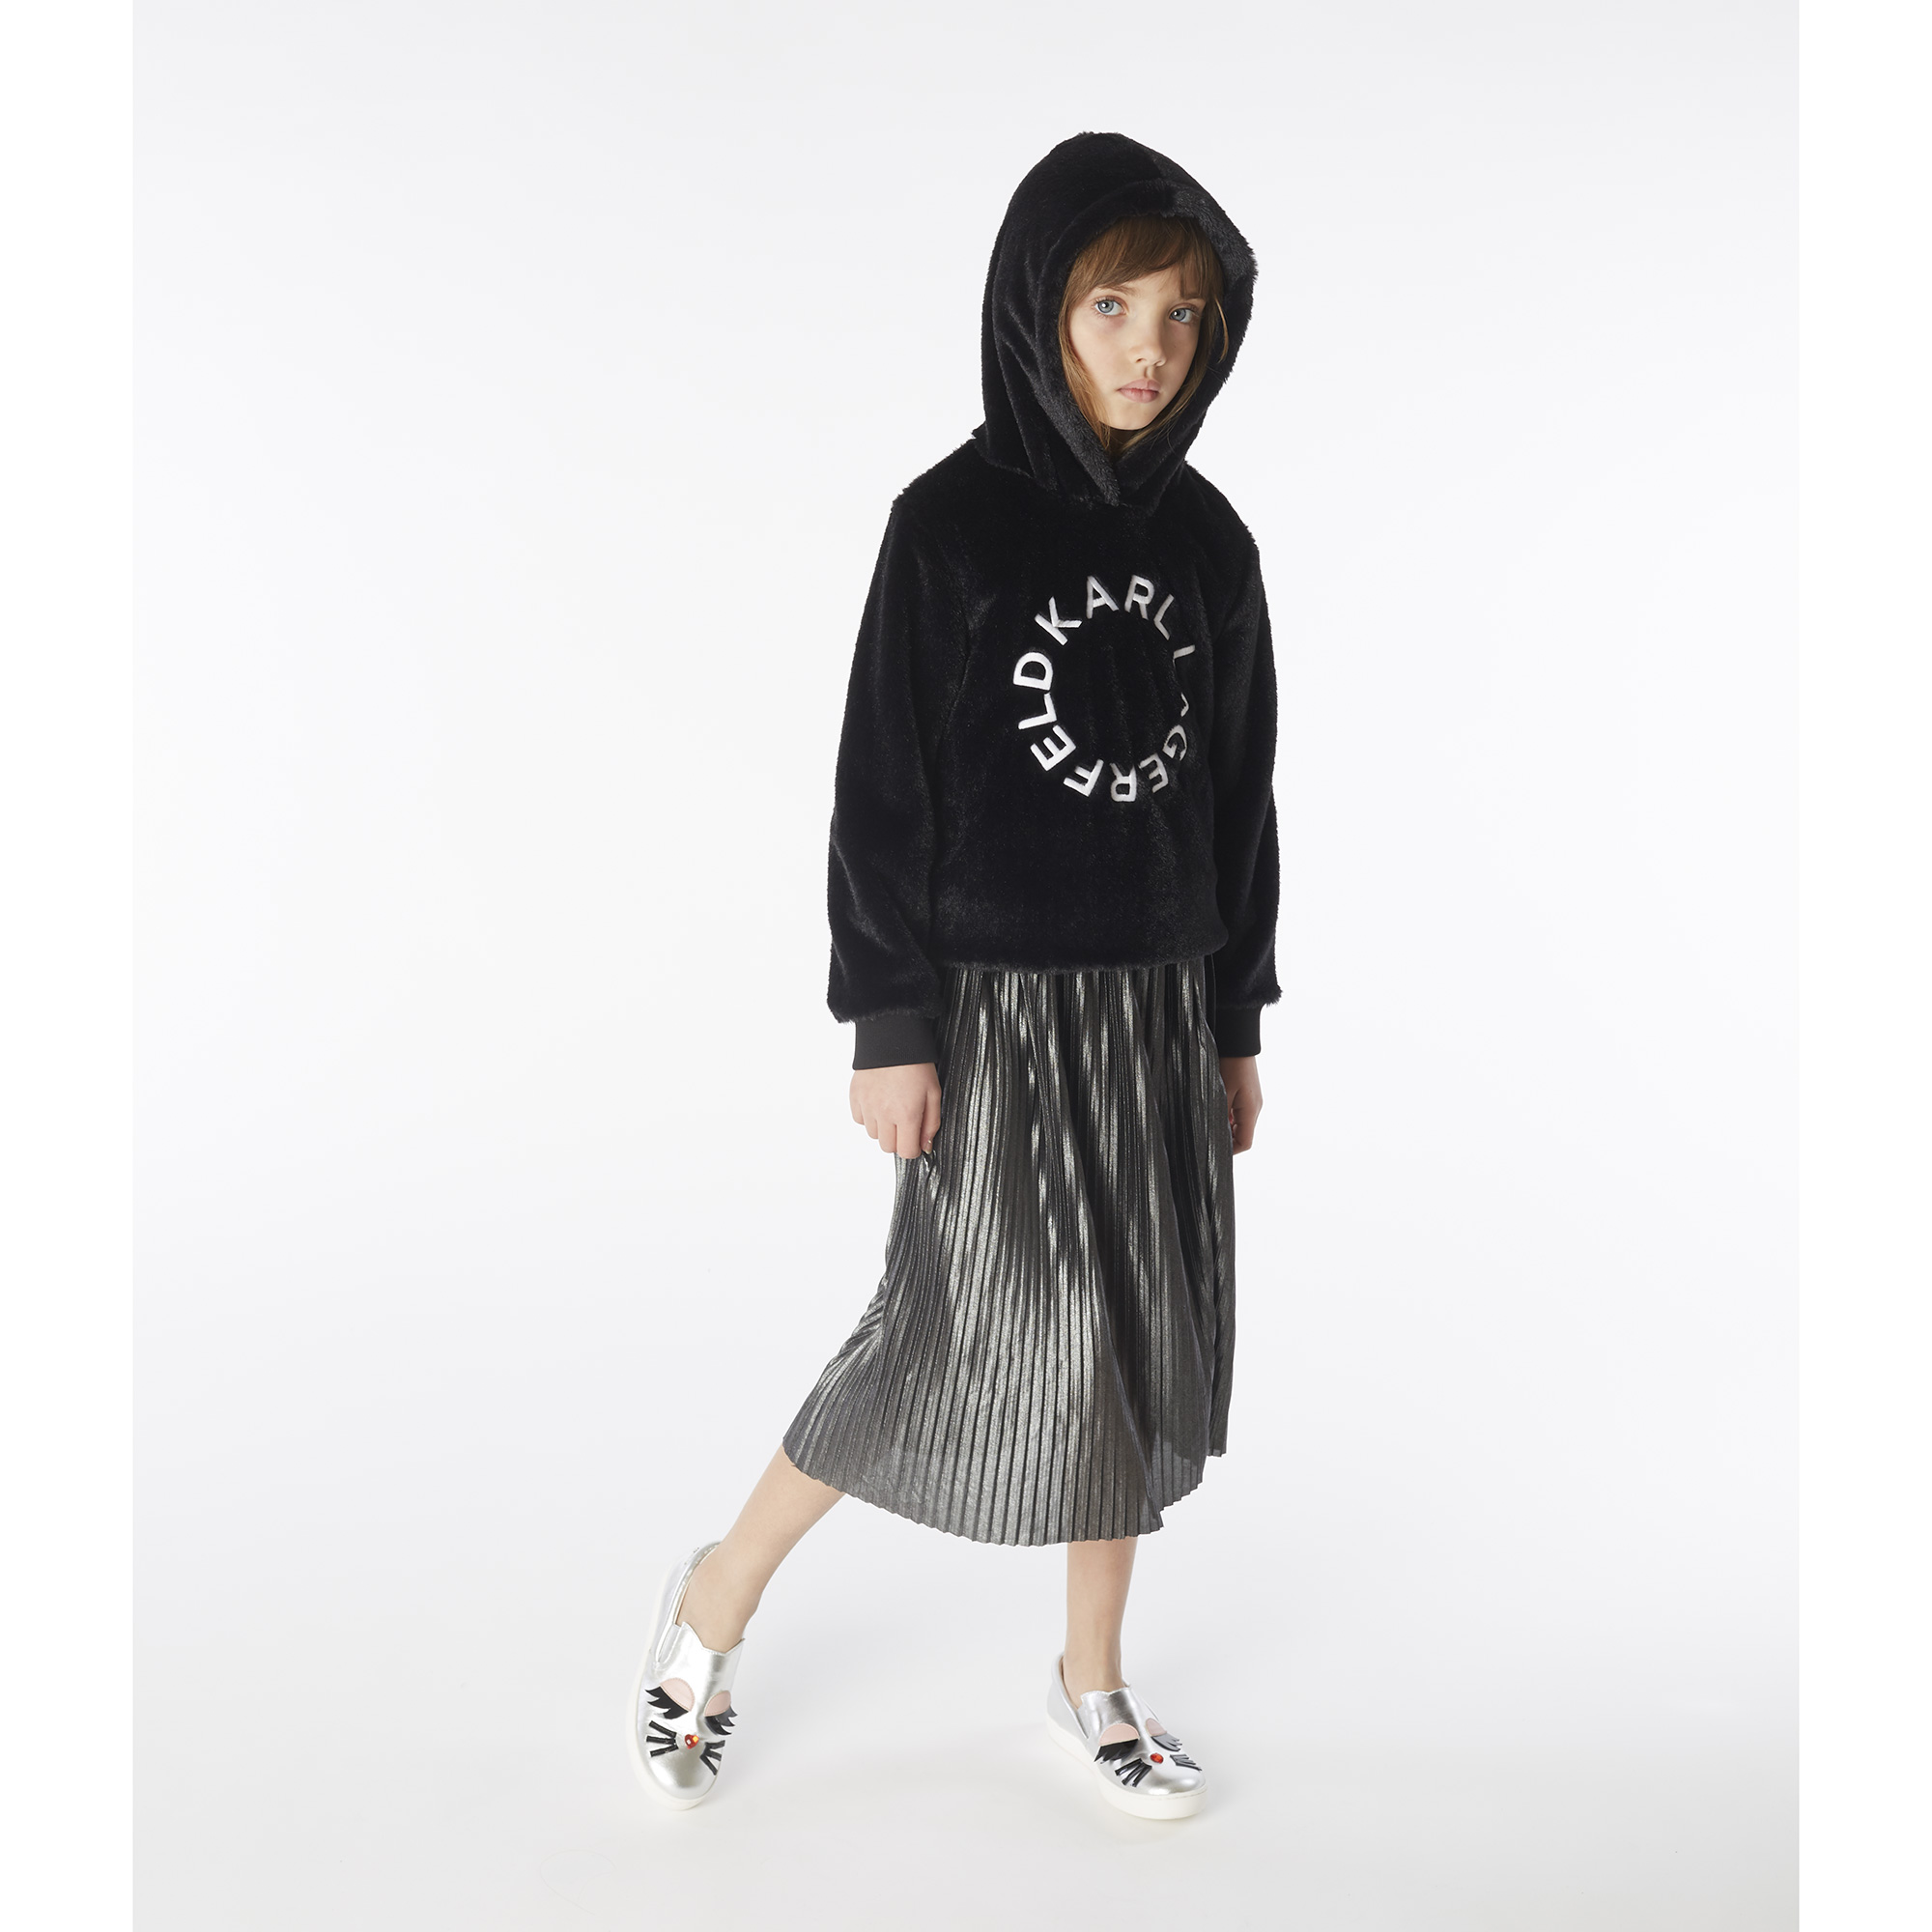 Look Karl Lagerfeld Fille 3  for 